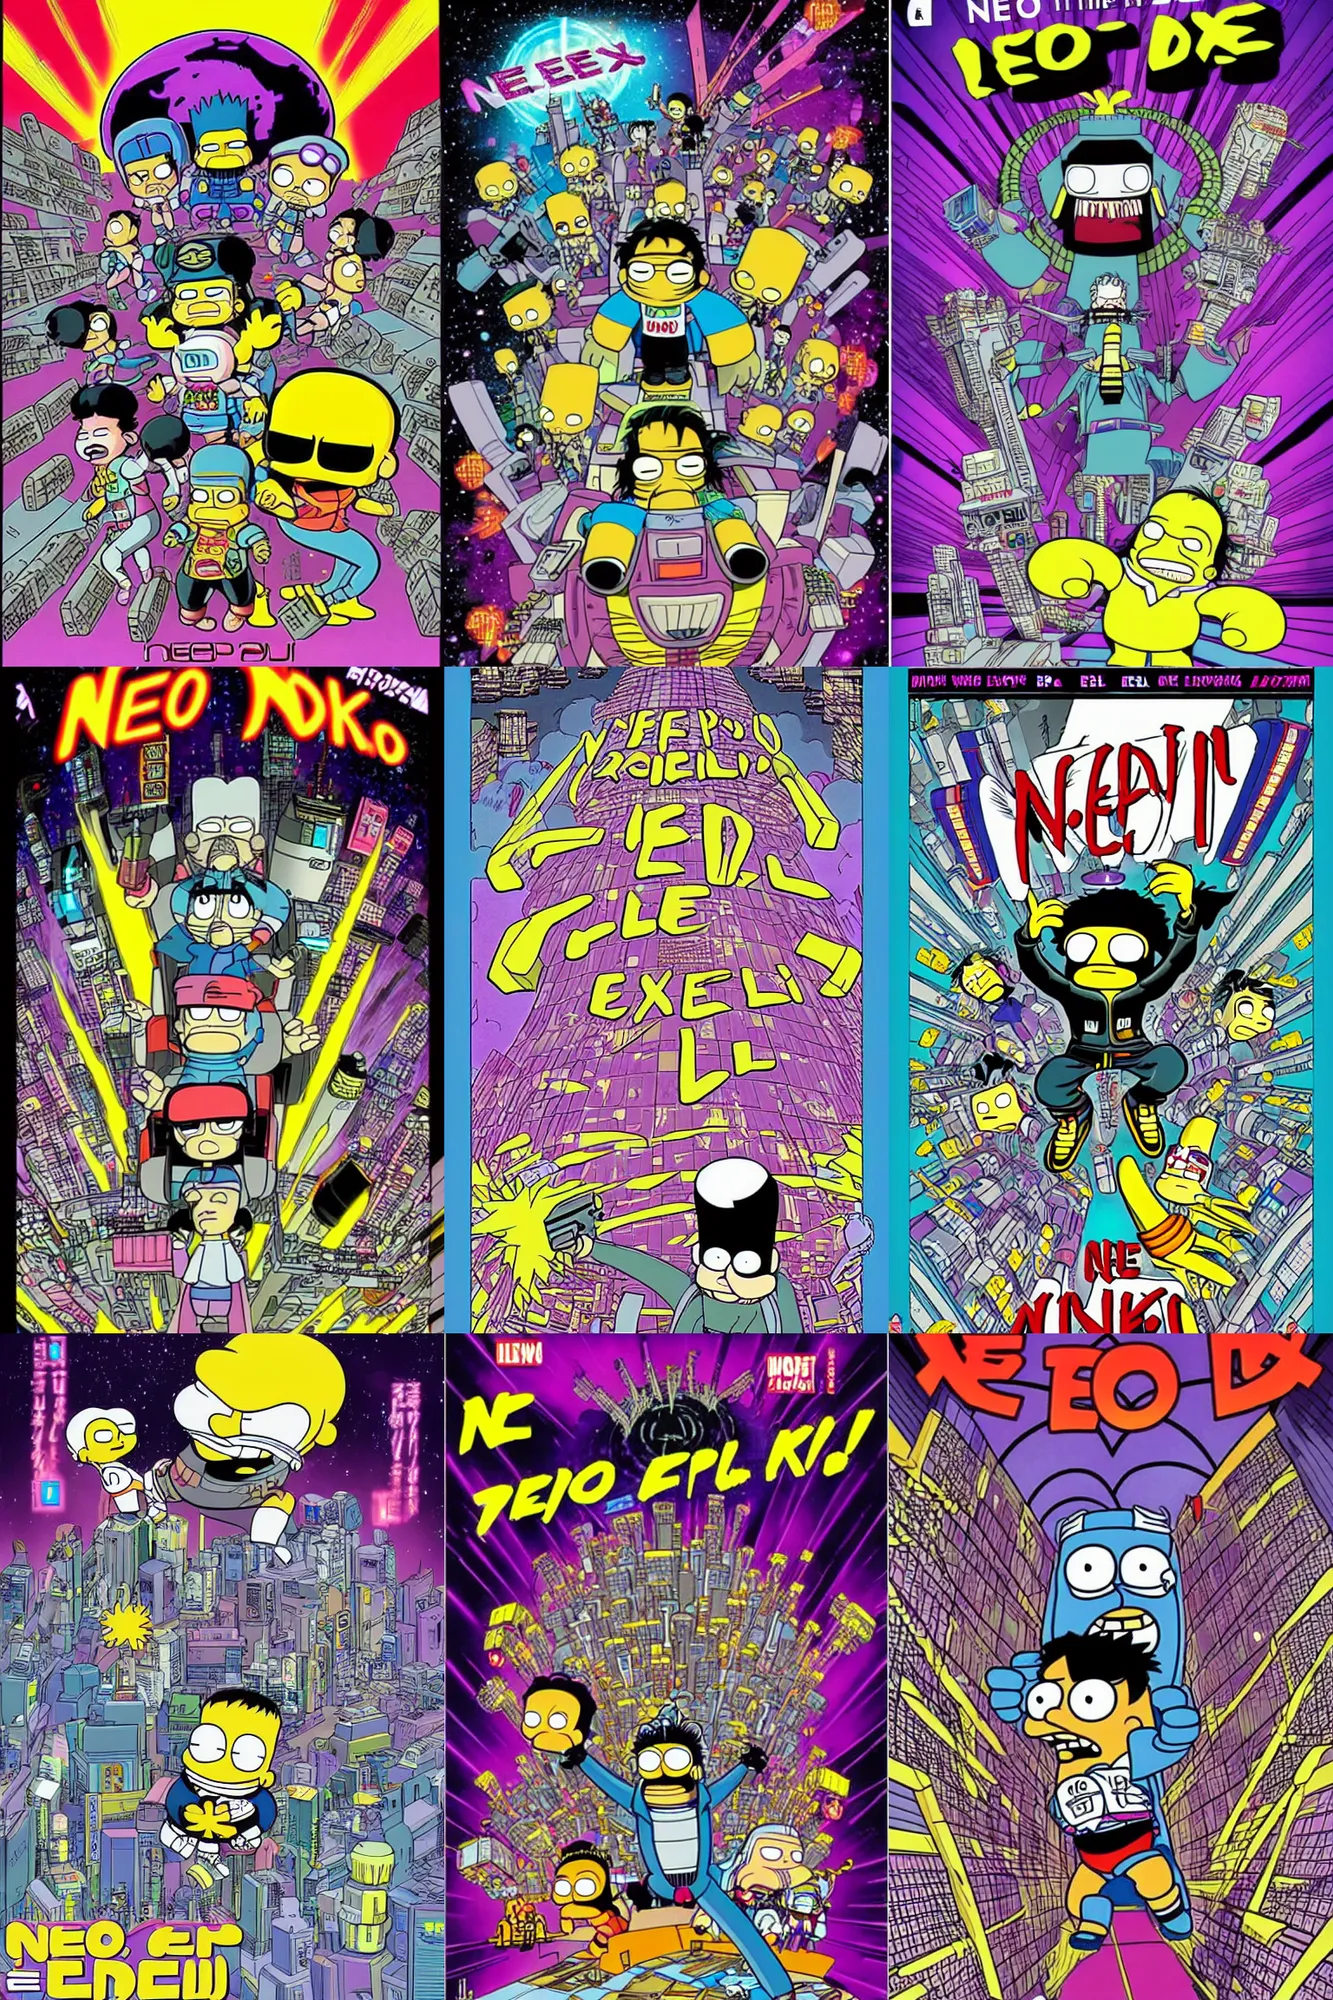 Image similar to neo tokyo is about to e. x. p. l. o. d. e.! by matt groening